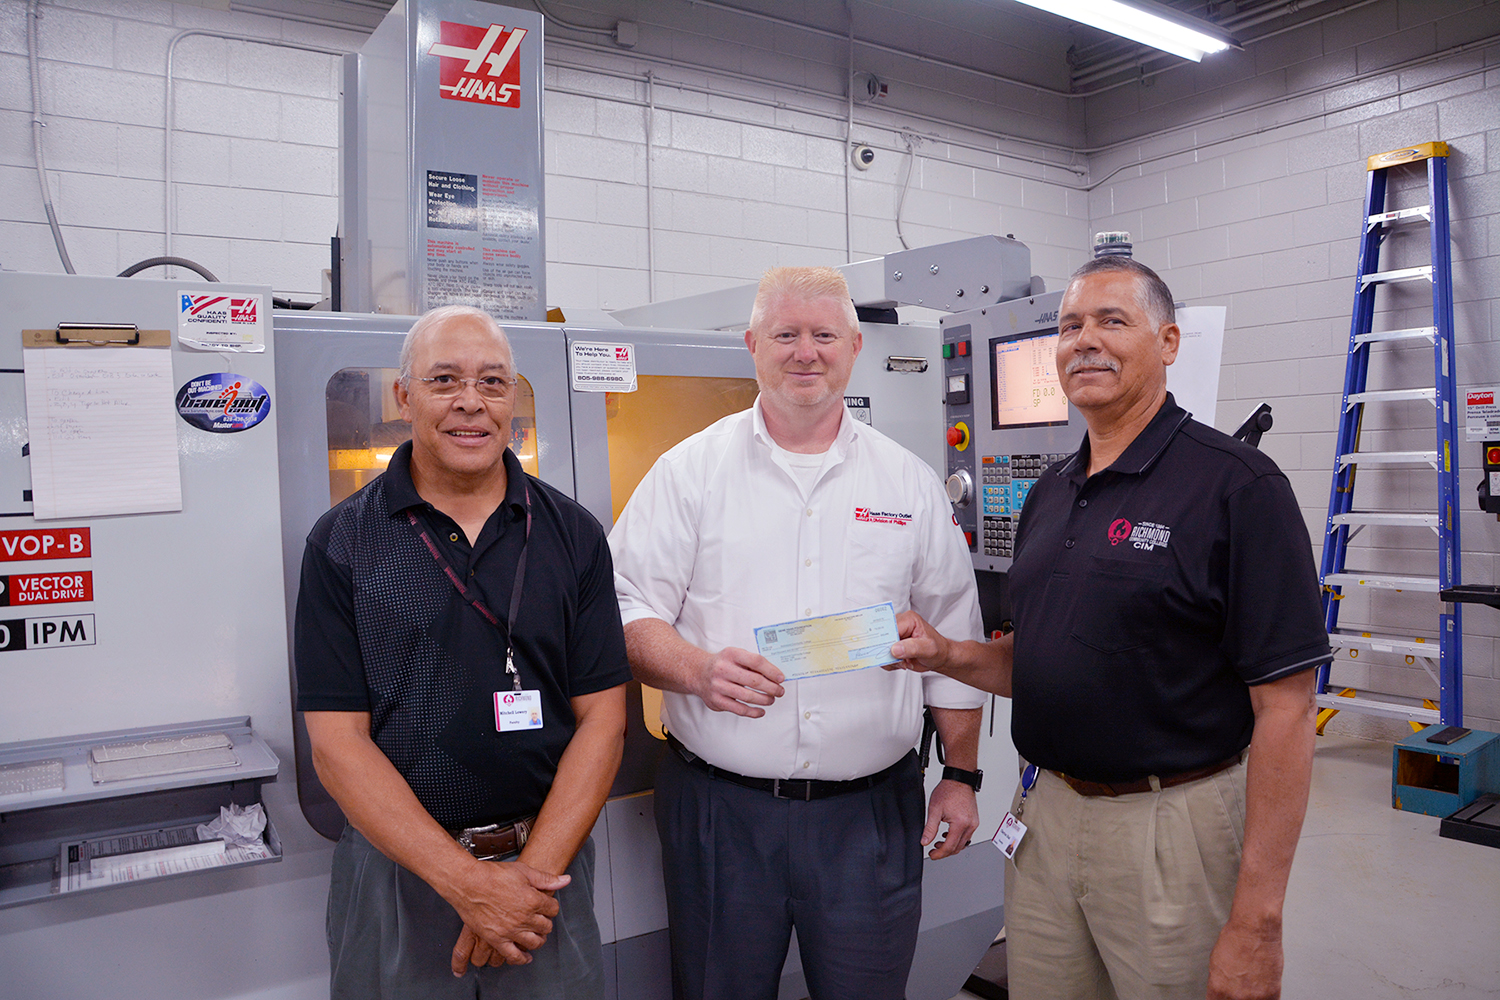 Haas Foundation representative presents check to the two machining instructors